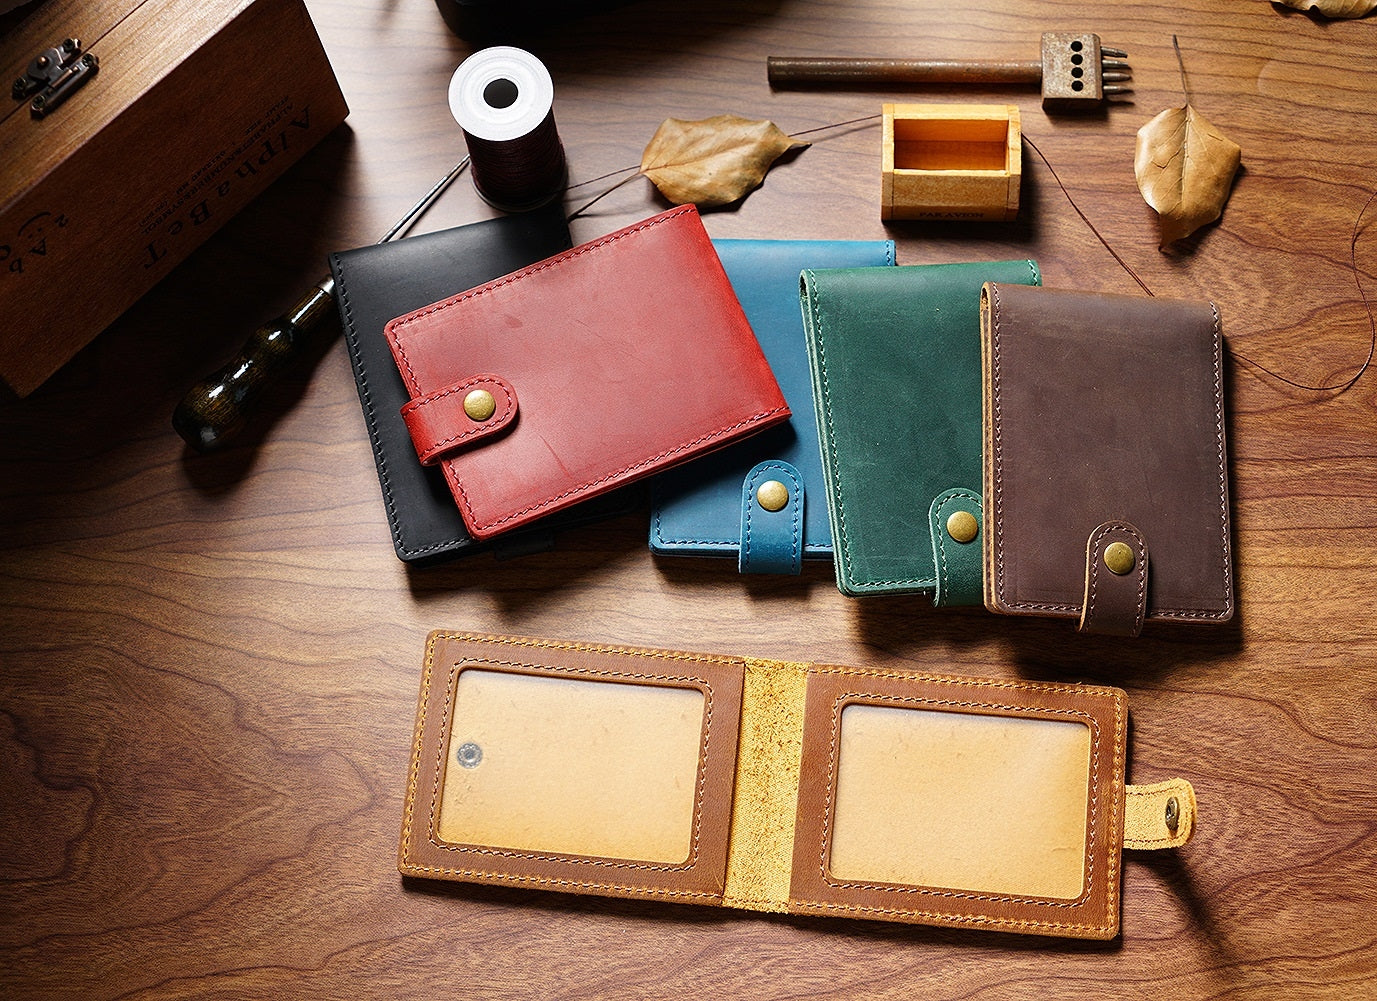 Classic Leather Card Holder Wallet (Buy 1 Get 1 Free Limited Time)